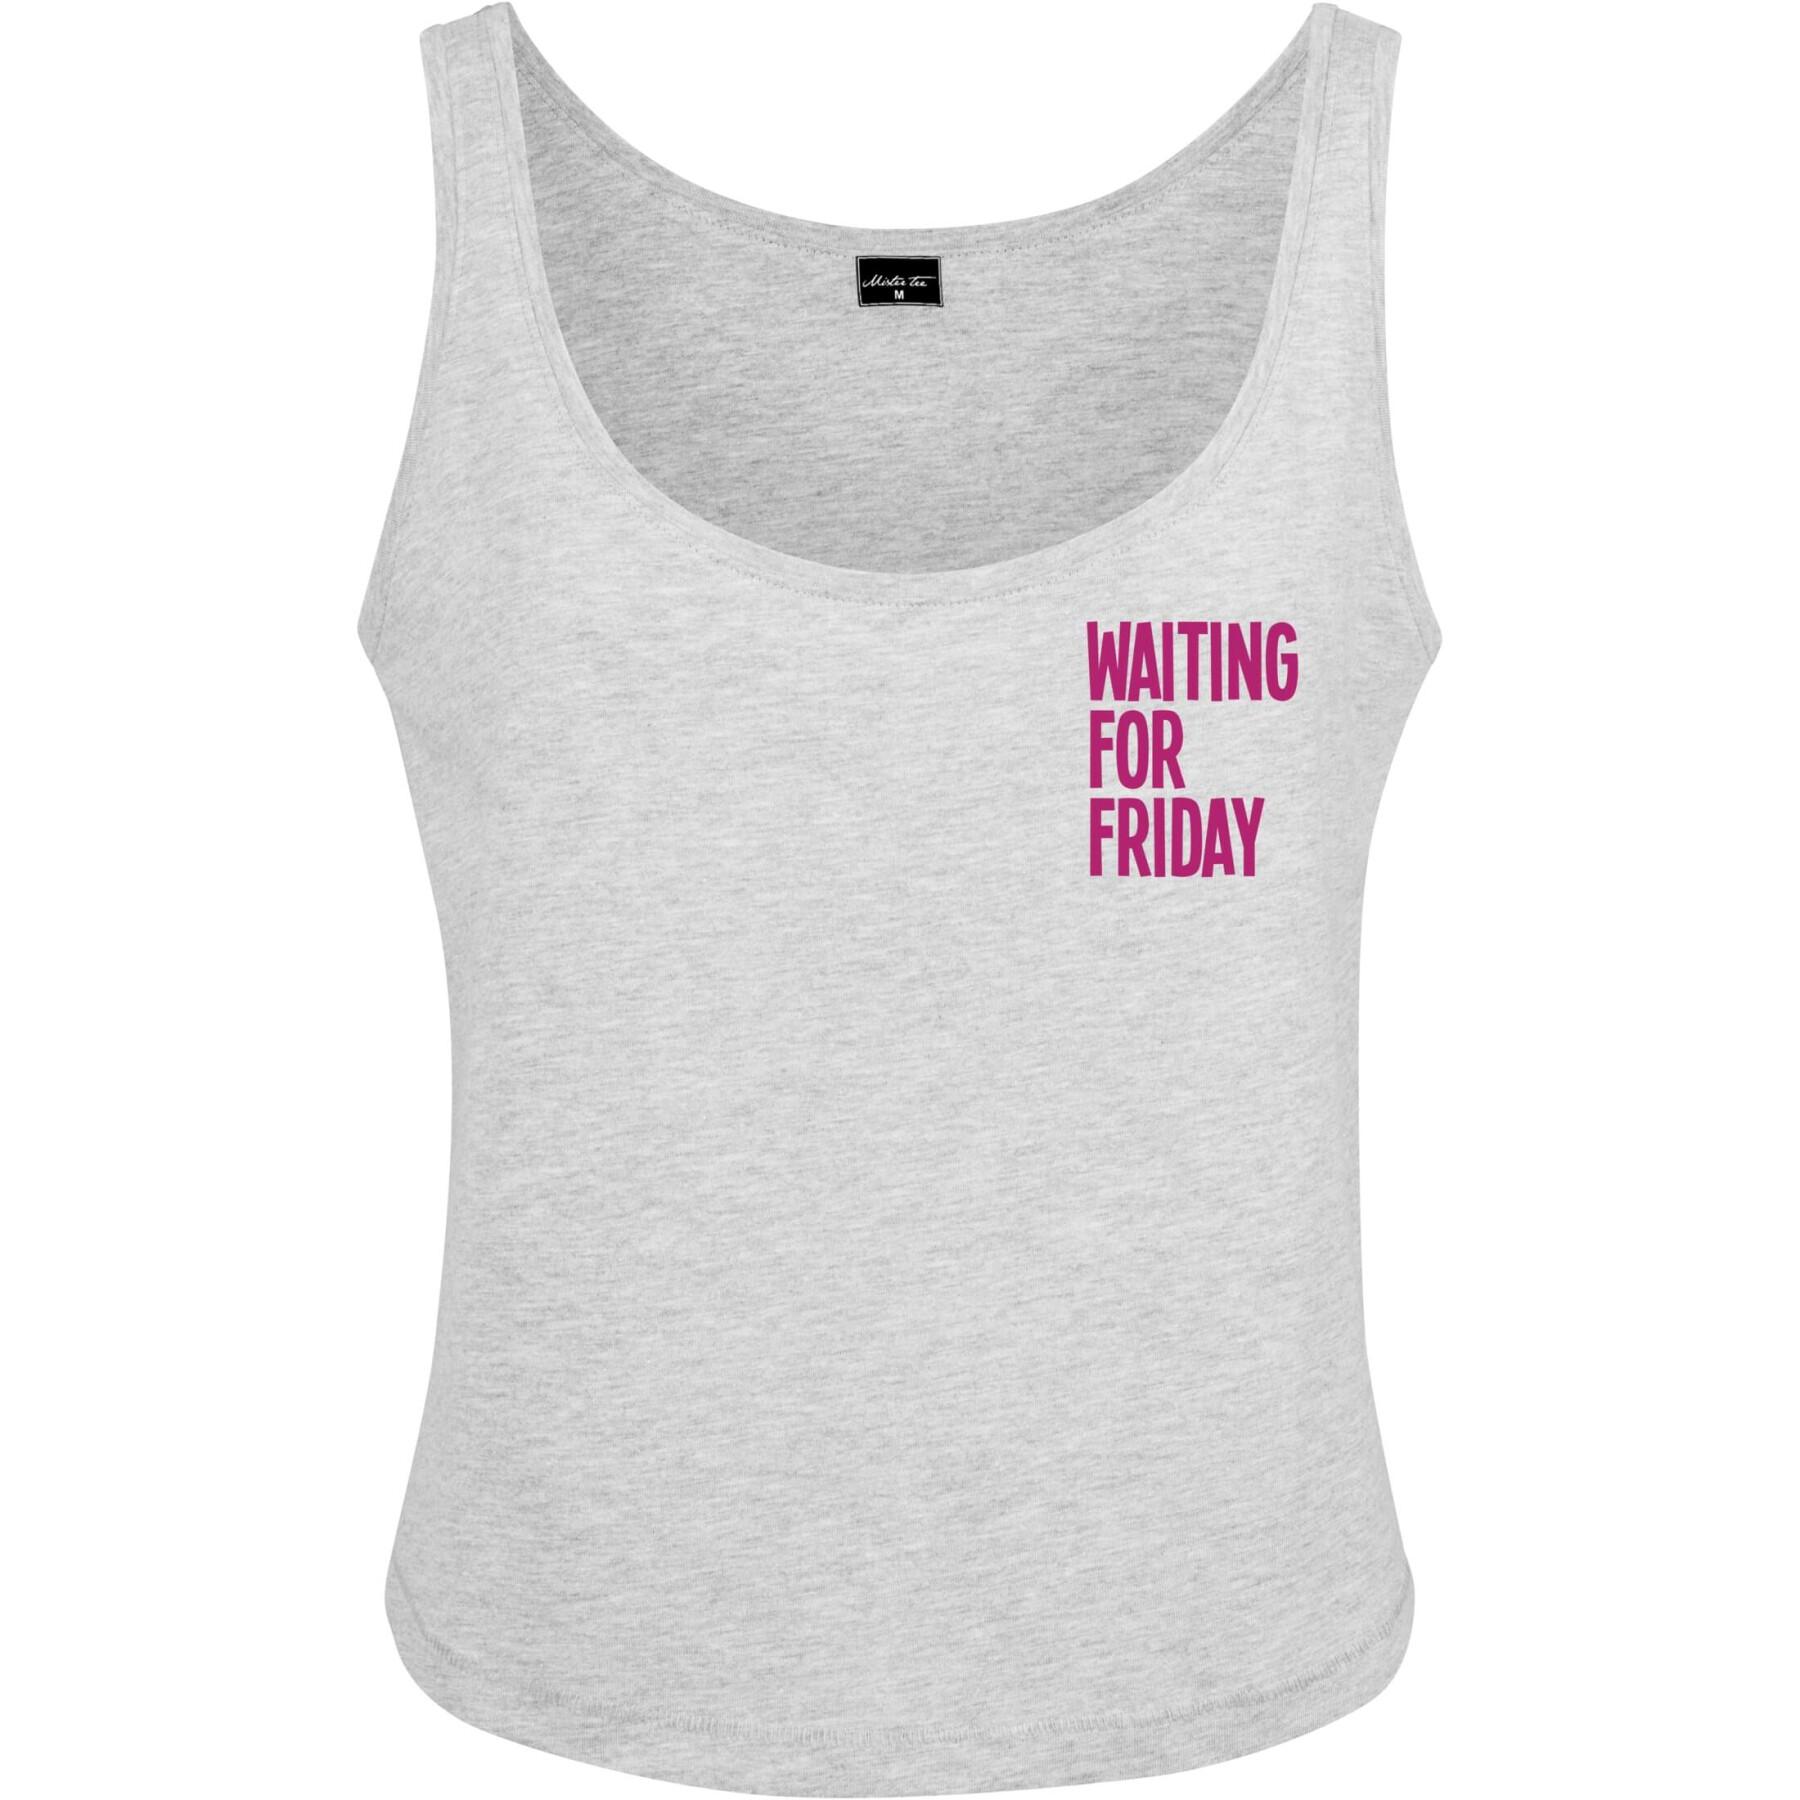 Women's tank top Mister Tee Waiting For Friday Box